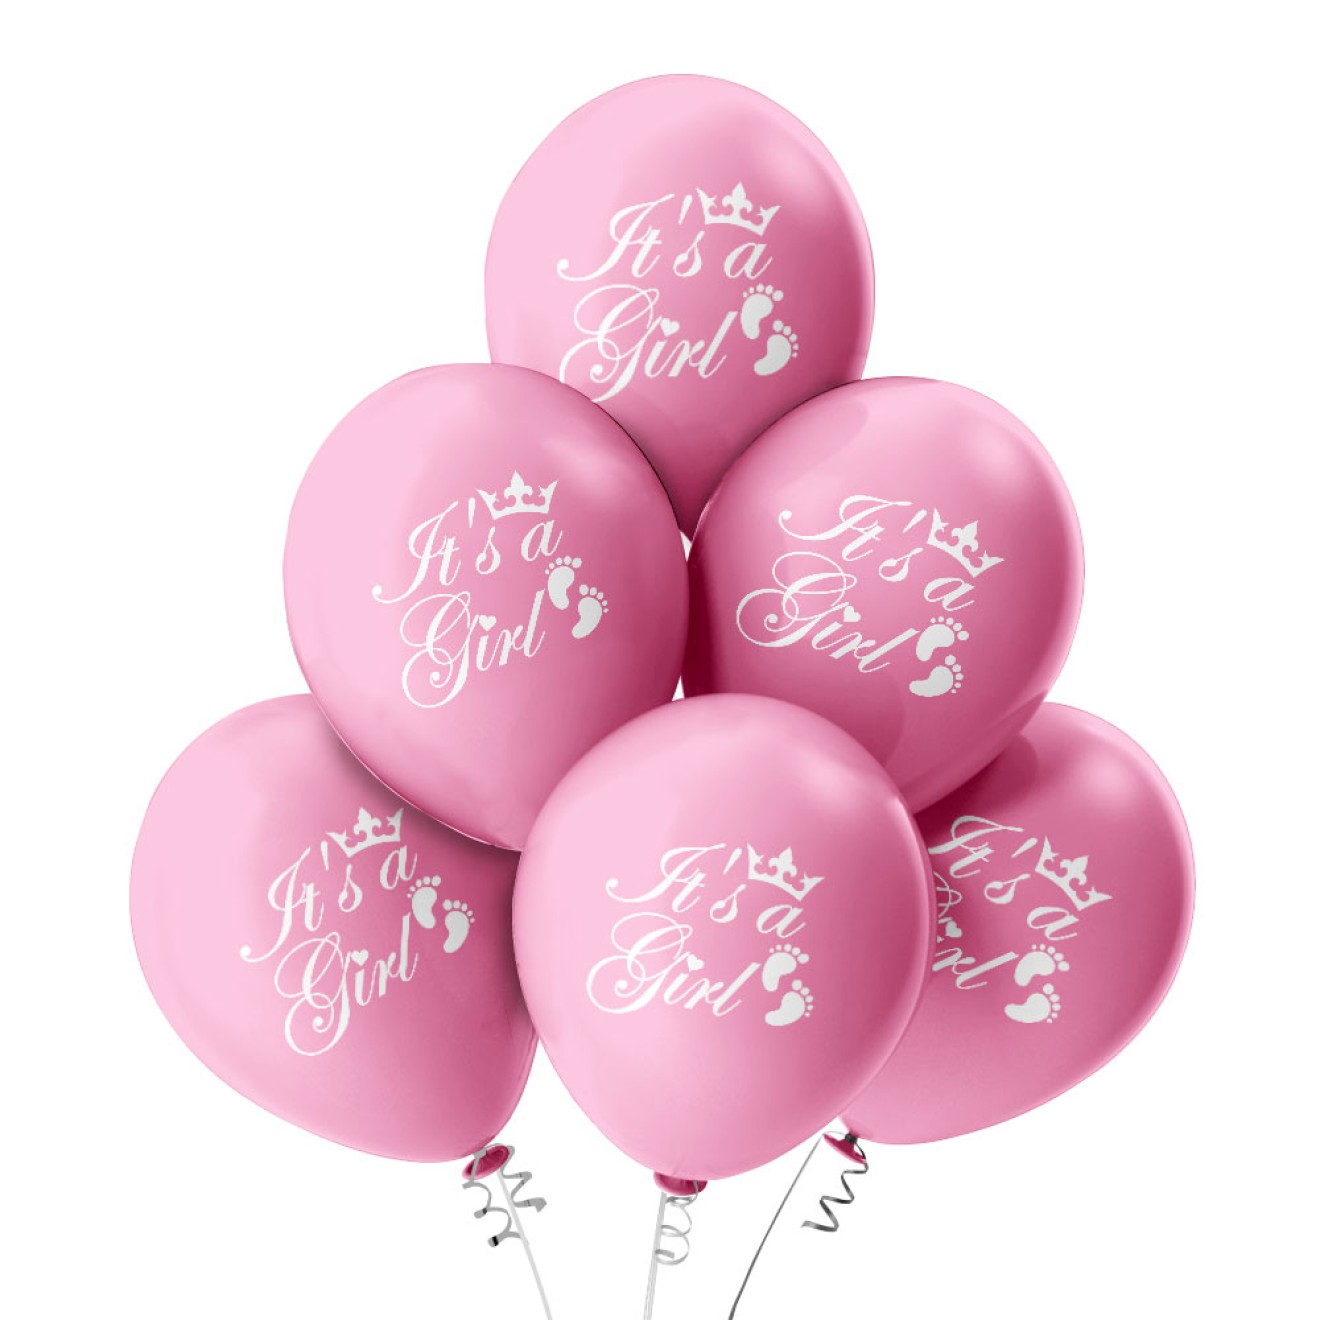 Luftballons Babyparty: It's A Girl - Freie Farbwahl